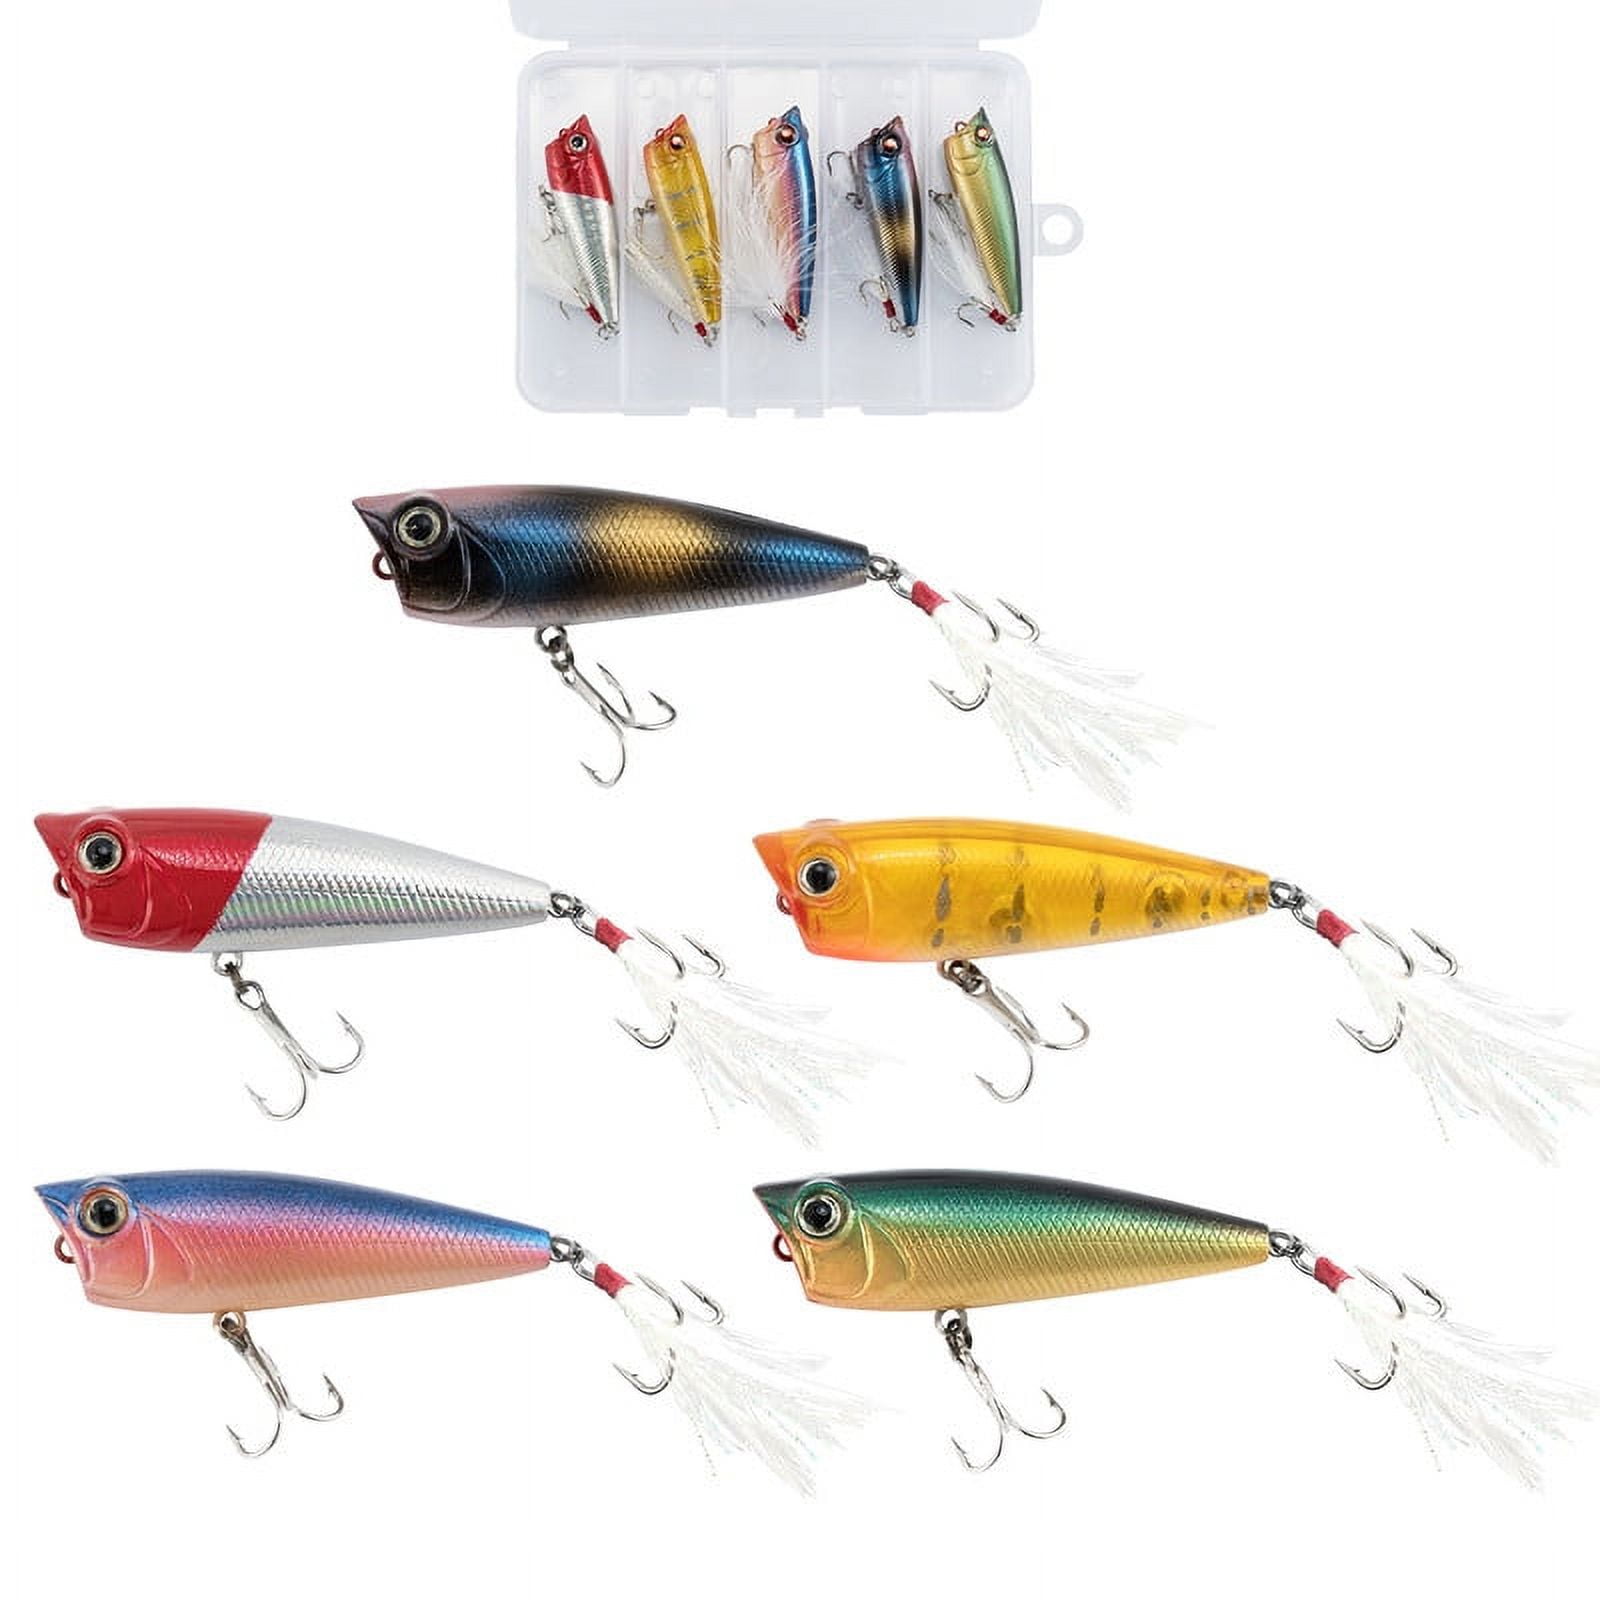 Rapala Jointed Minnow 09 - TackleDirect